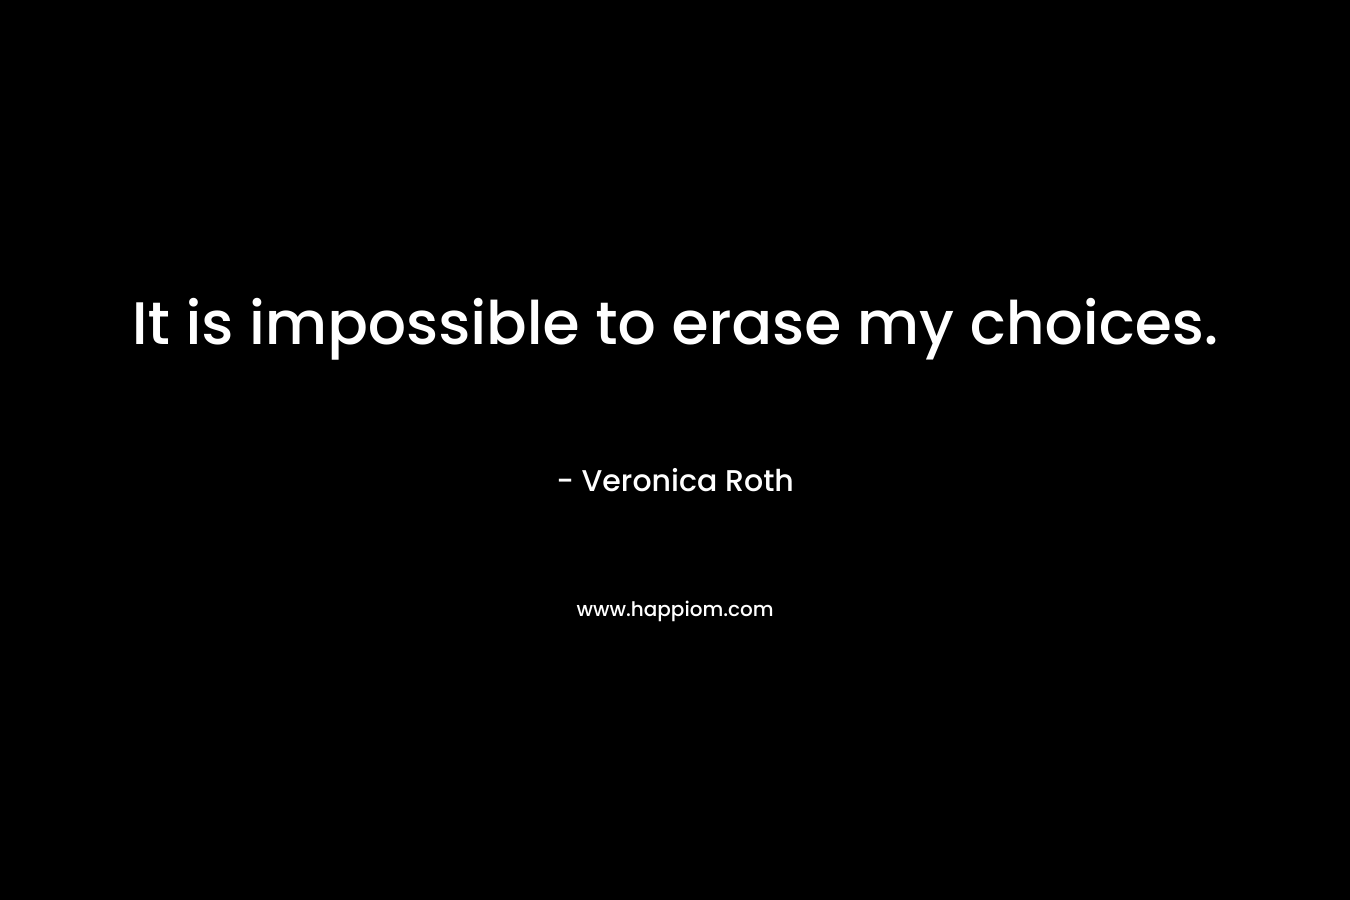 It is impossible to erase my choices.